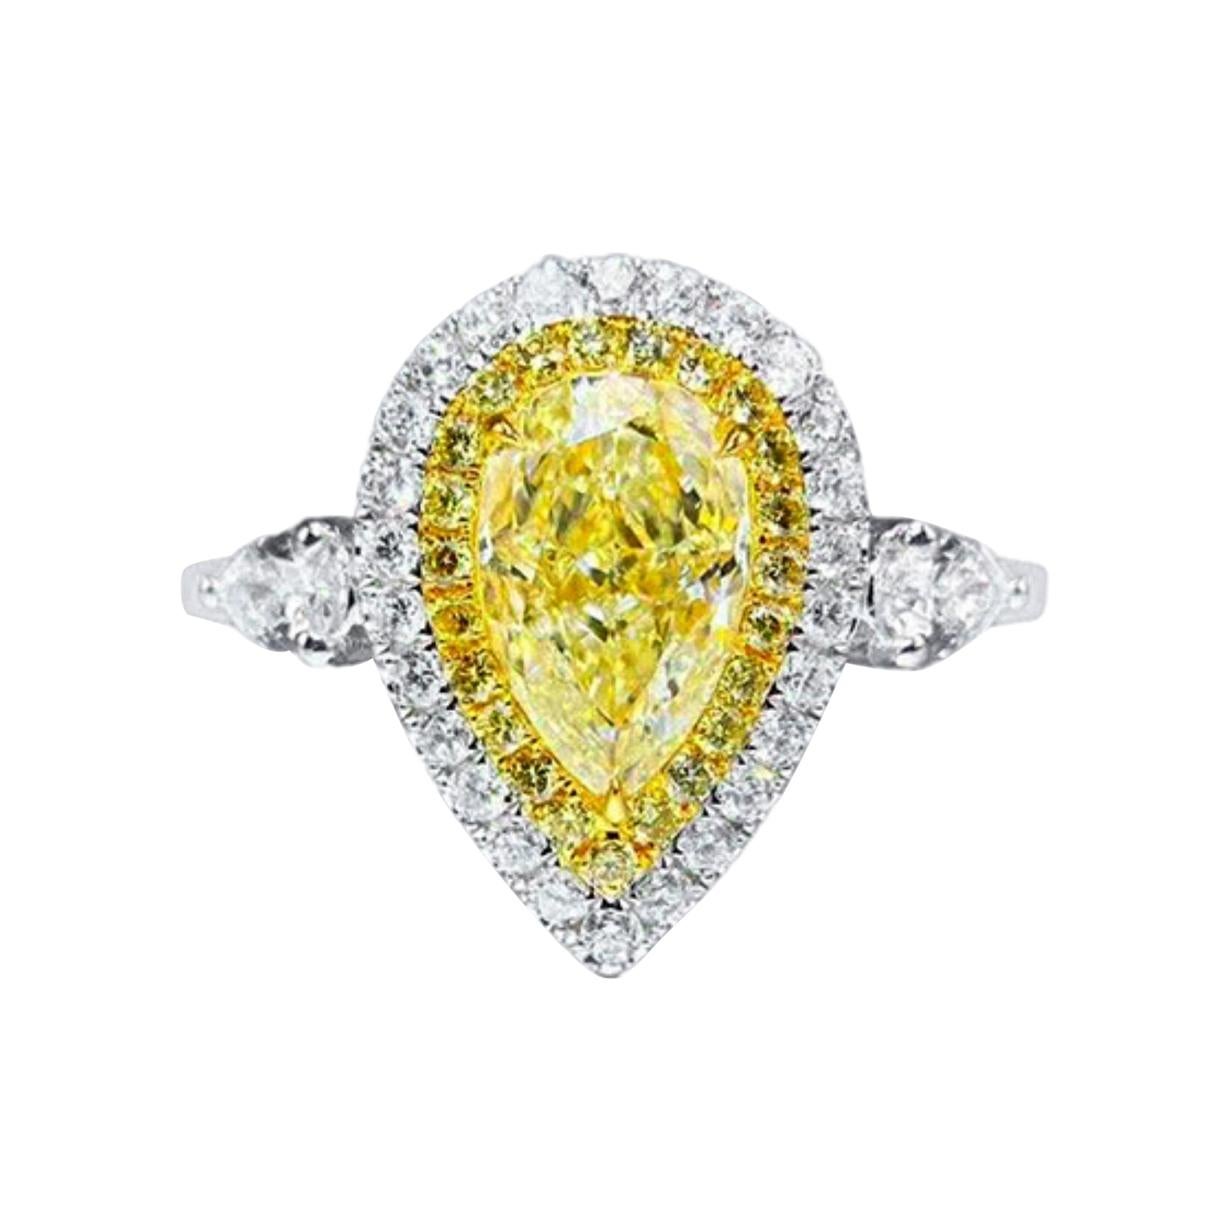 2 Ct Fancy Yellow Diamond Ring 18k White Gold For Sale